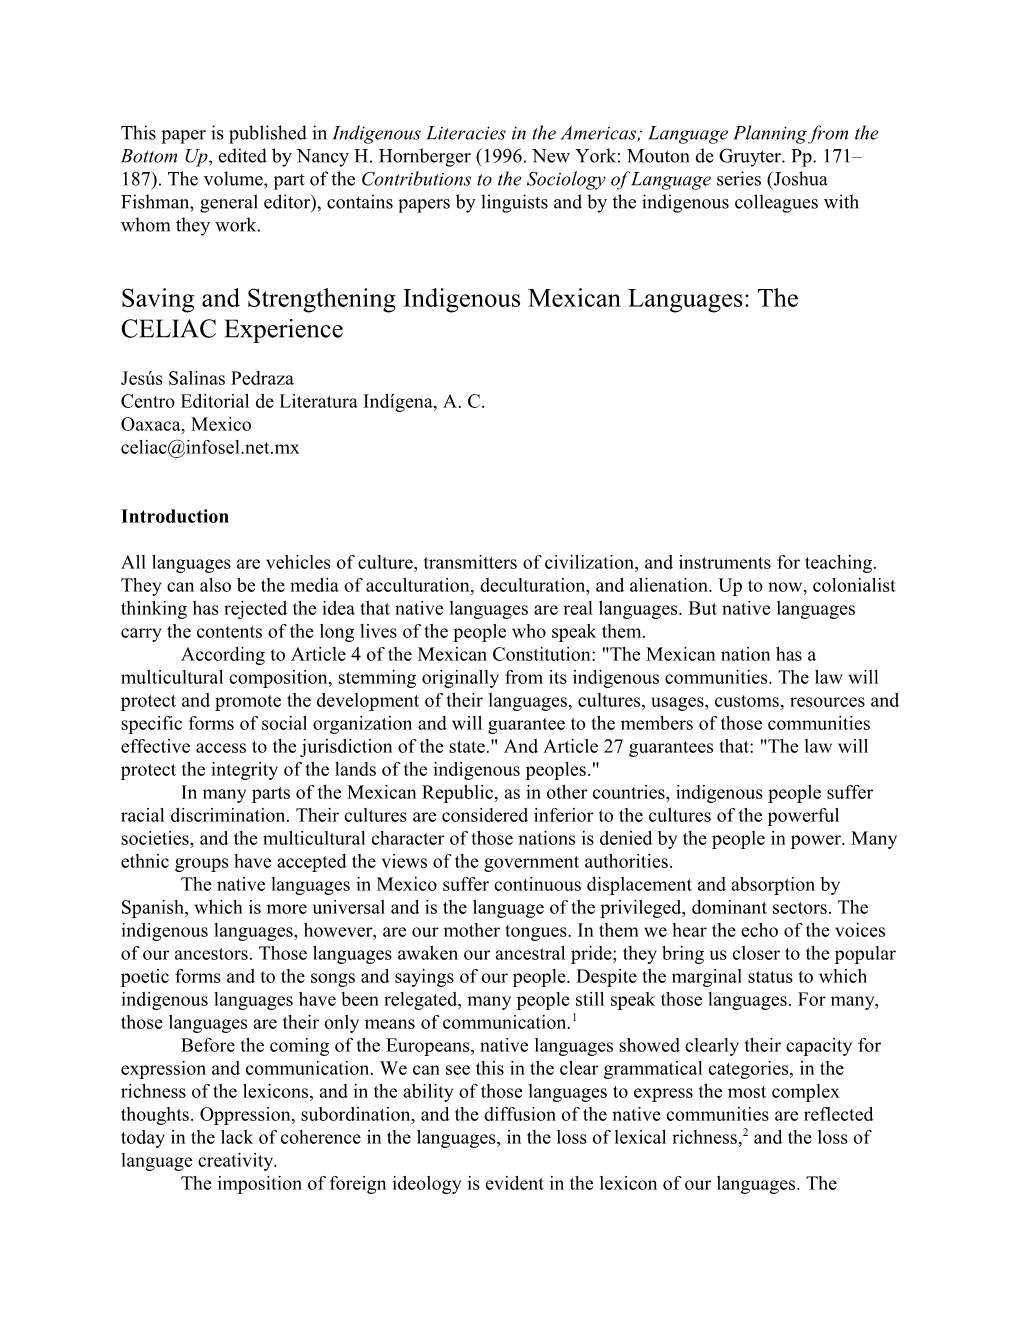 This Paper Is Published in Indigenous Literacies in the Americas, Edited by Nancy H